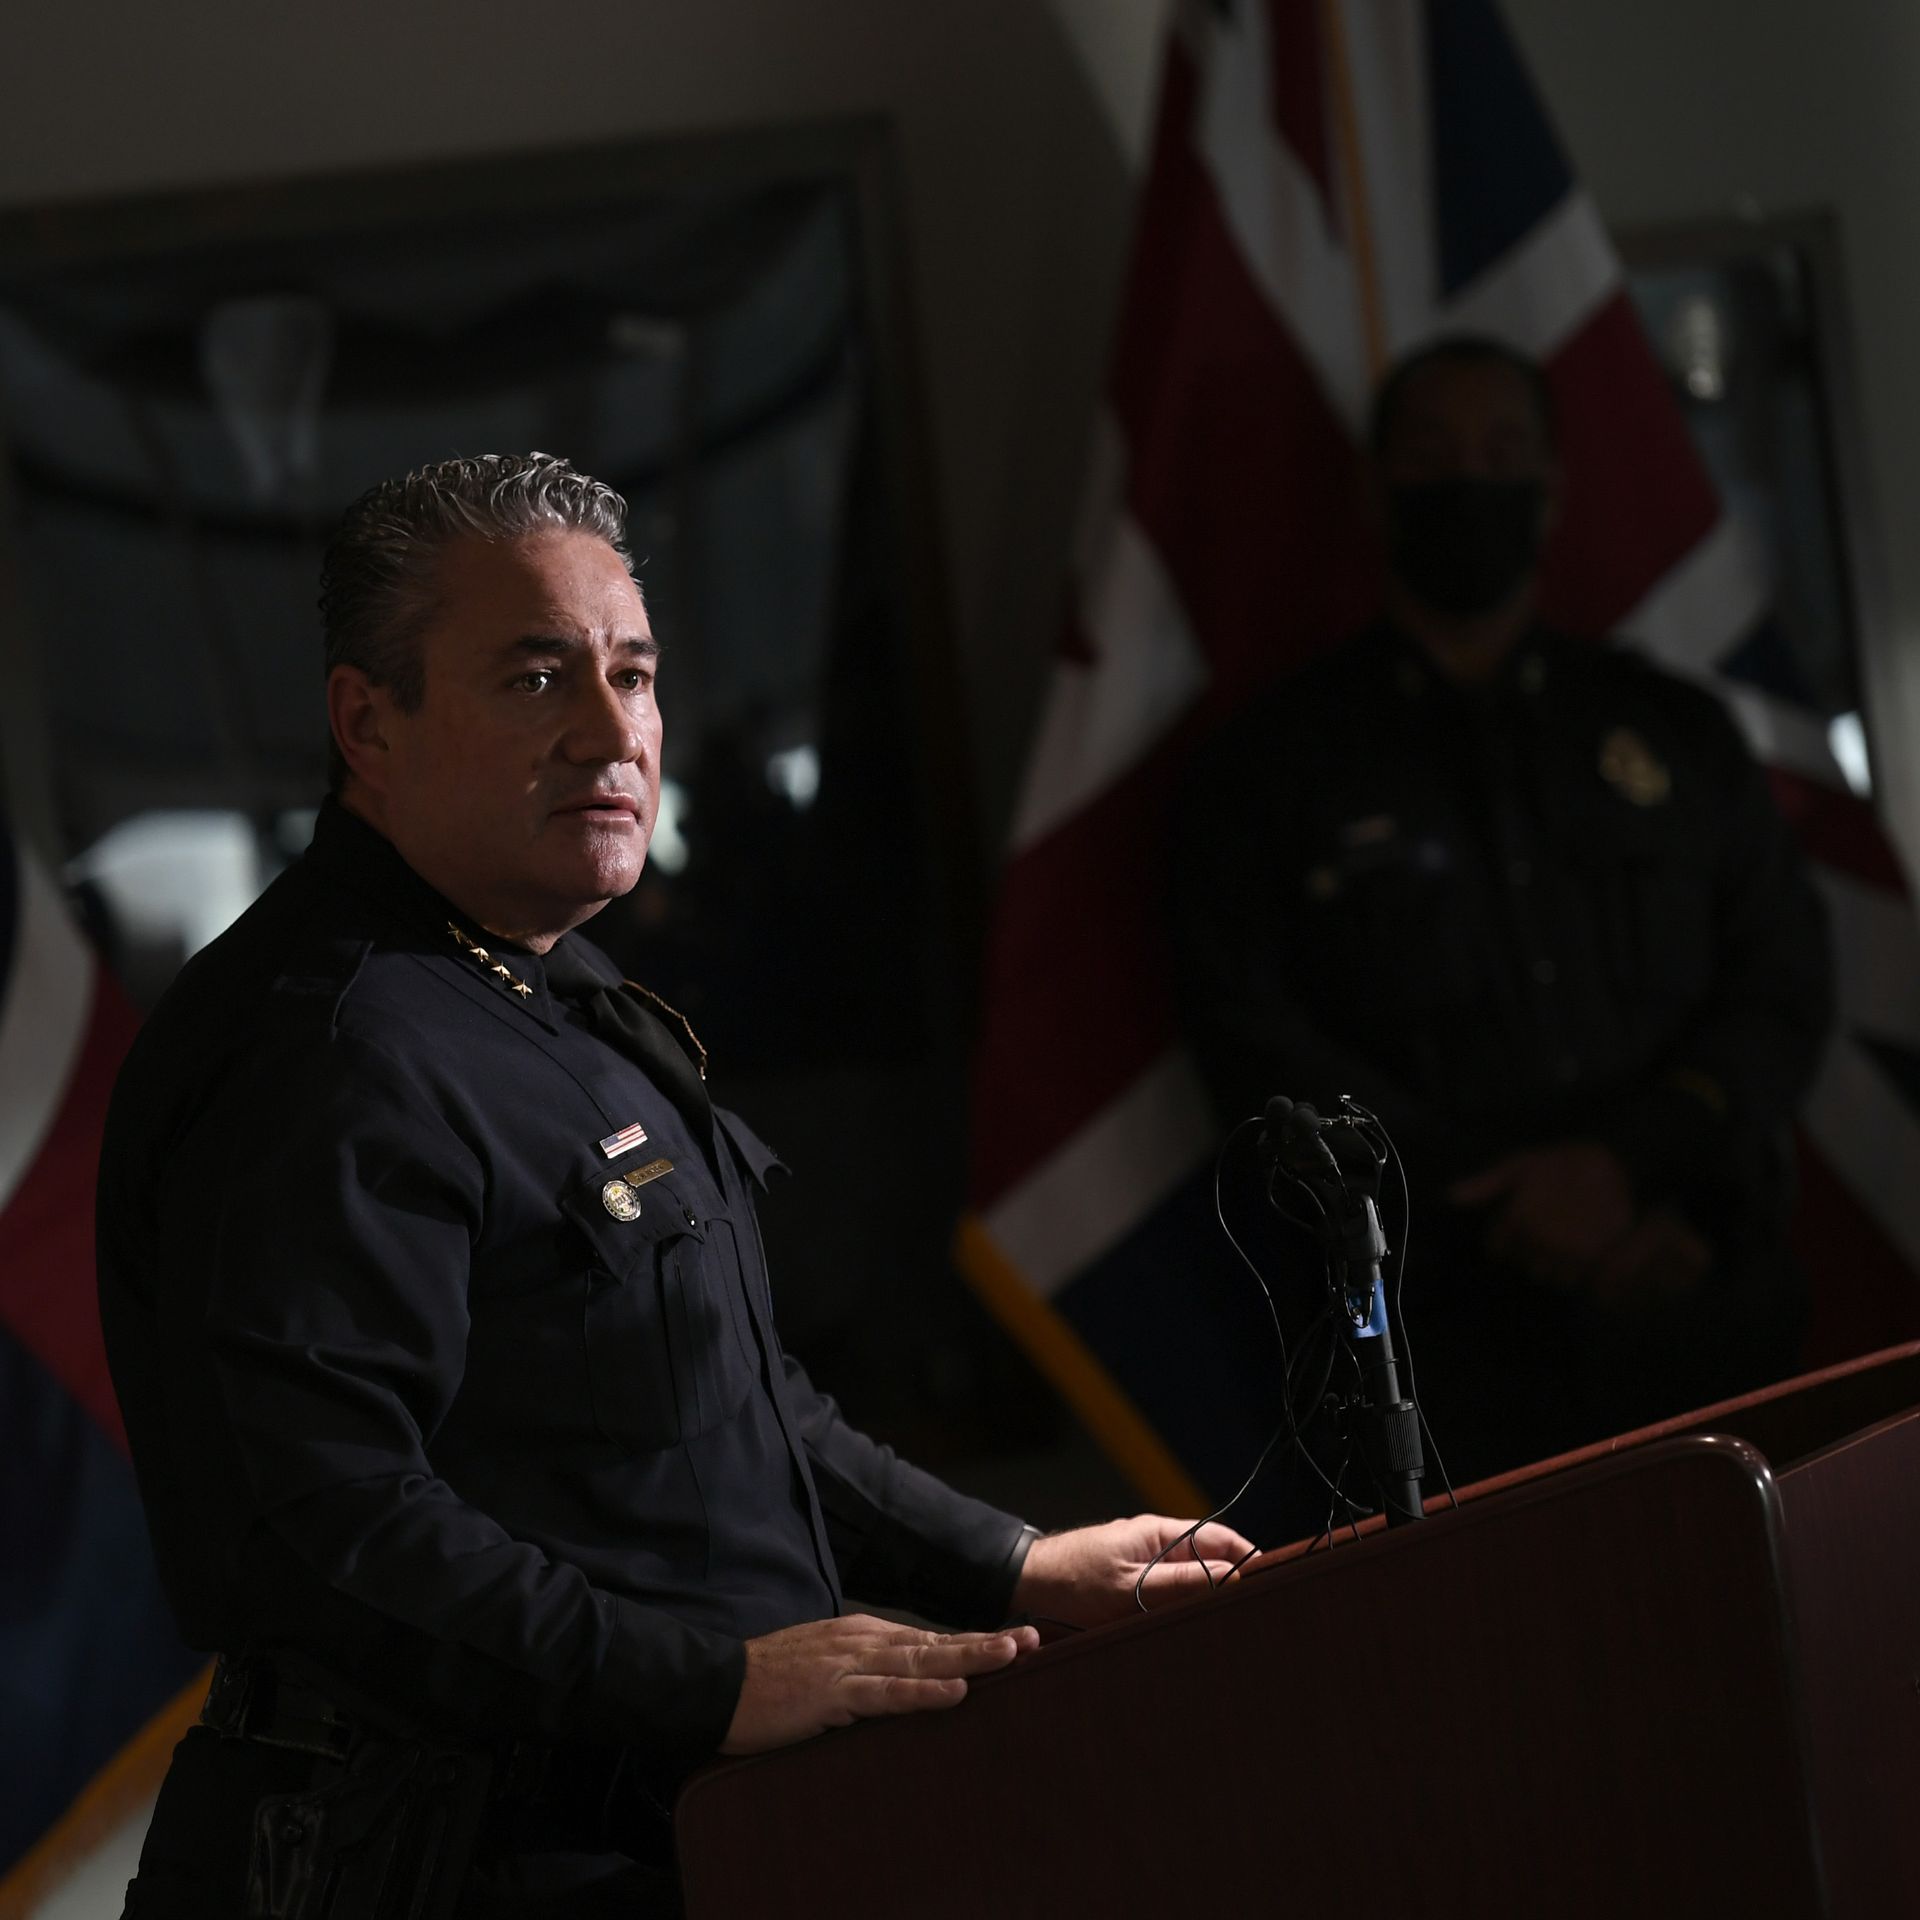 A police chief in full uniform stands near a lectern in a dimly-lit room while addressing member of the press.  